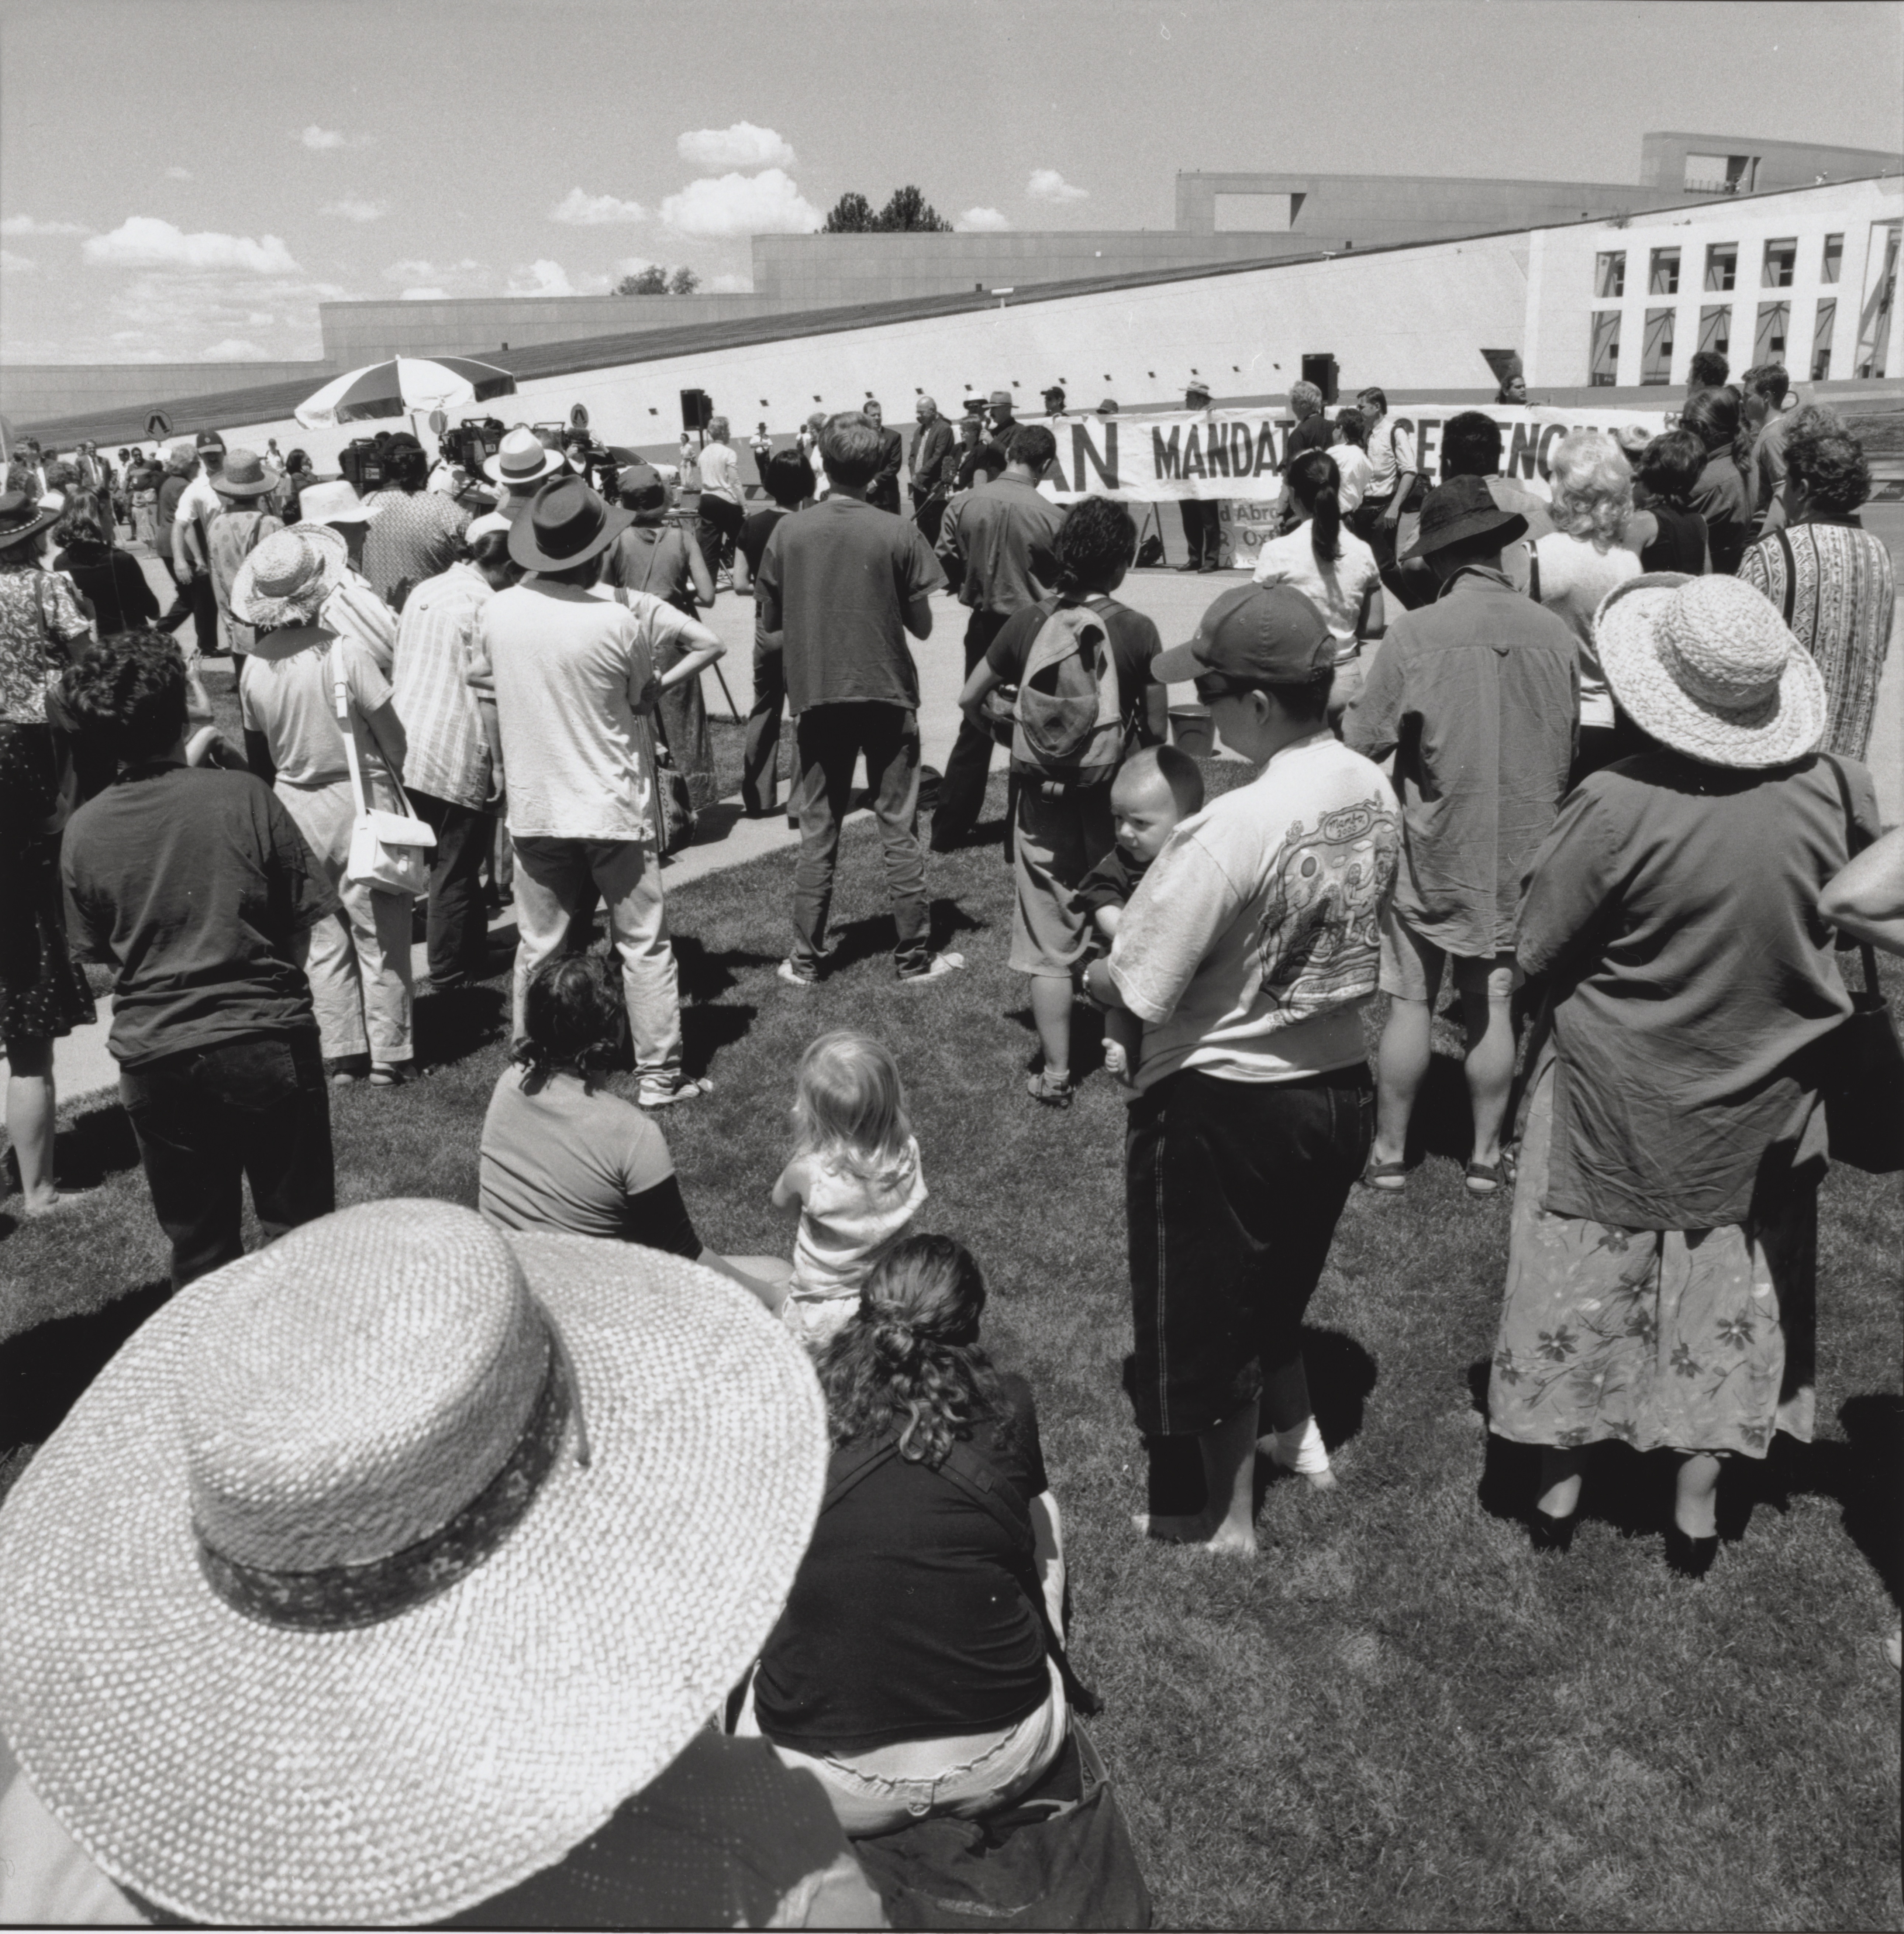 Loui Seselja, Photograph of a protest rally against Northern Territory and Western Australian mandatory sentencing laws held on the final day of the Senate Legal and Constitutional References Committee inquiry into mandatory sentencing, 17 February 2000, at Parliament House, Canberra. National Library of Australia, PIC NL38400/23A/7.